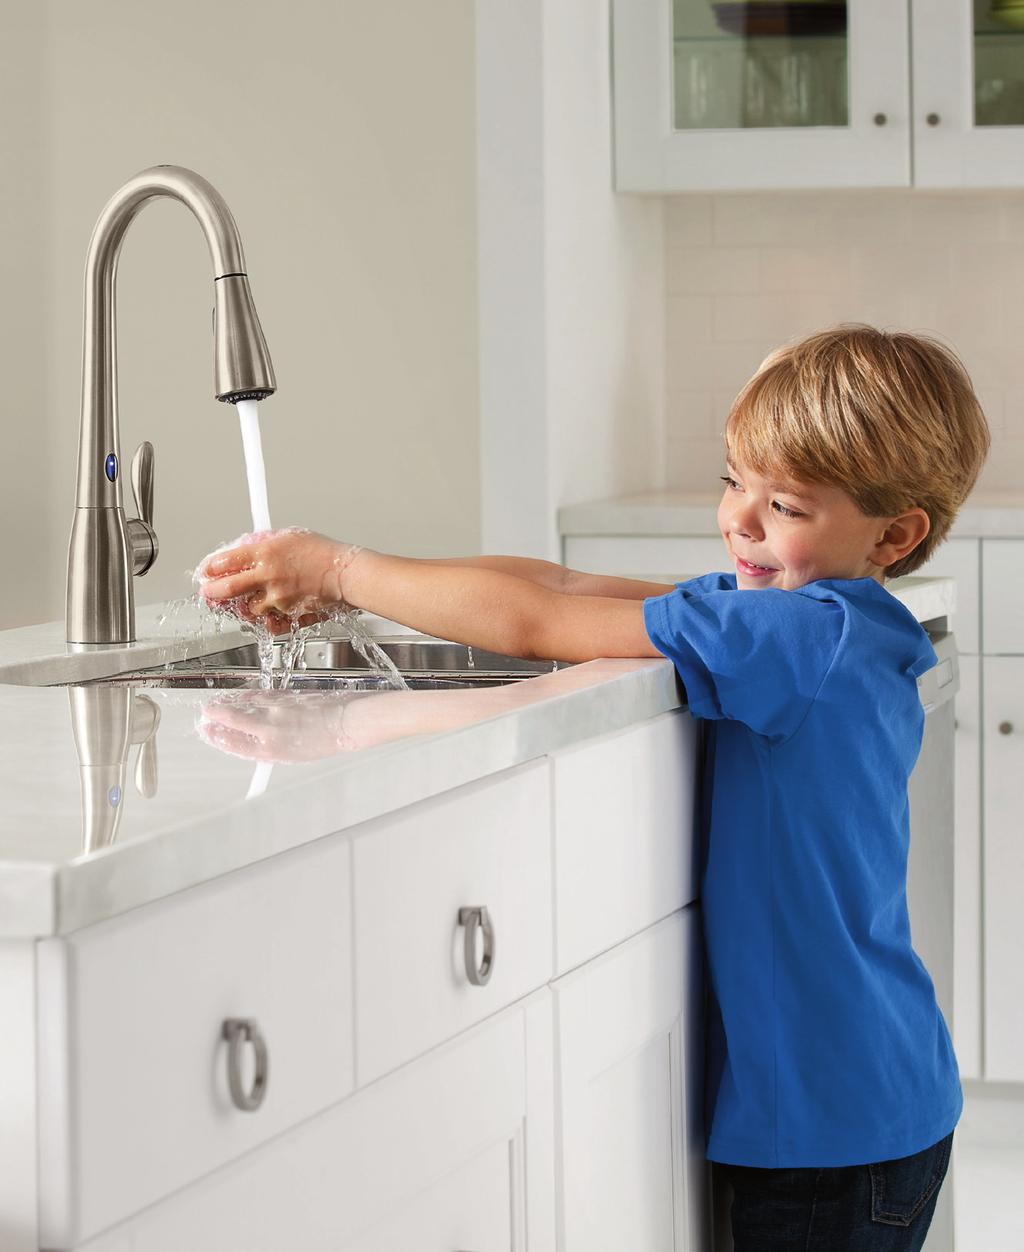 >> 1. MotionSense Imagine the convenience of having a kitchen faucet that can sense what you re trying to accomplish and, with a simple wave of the hand, immediately